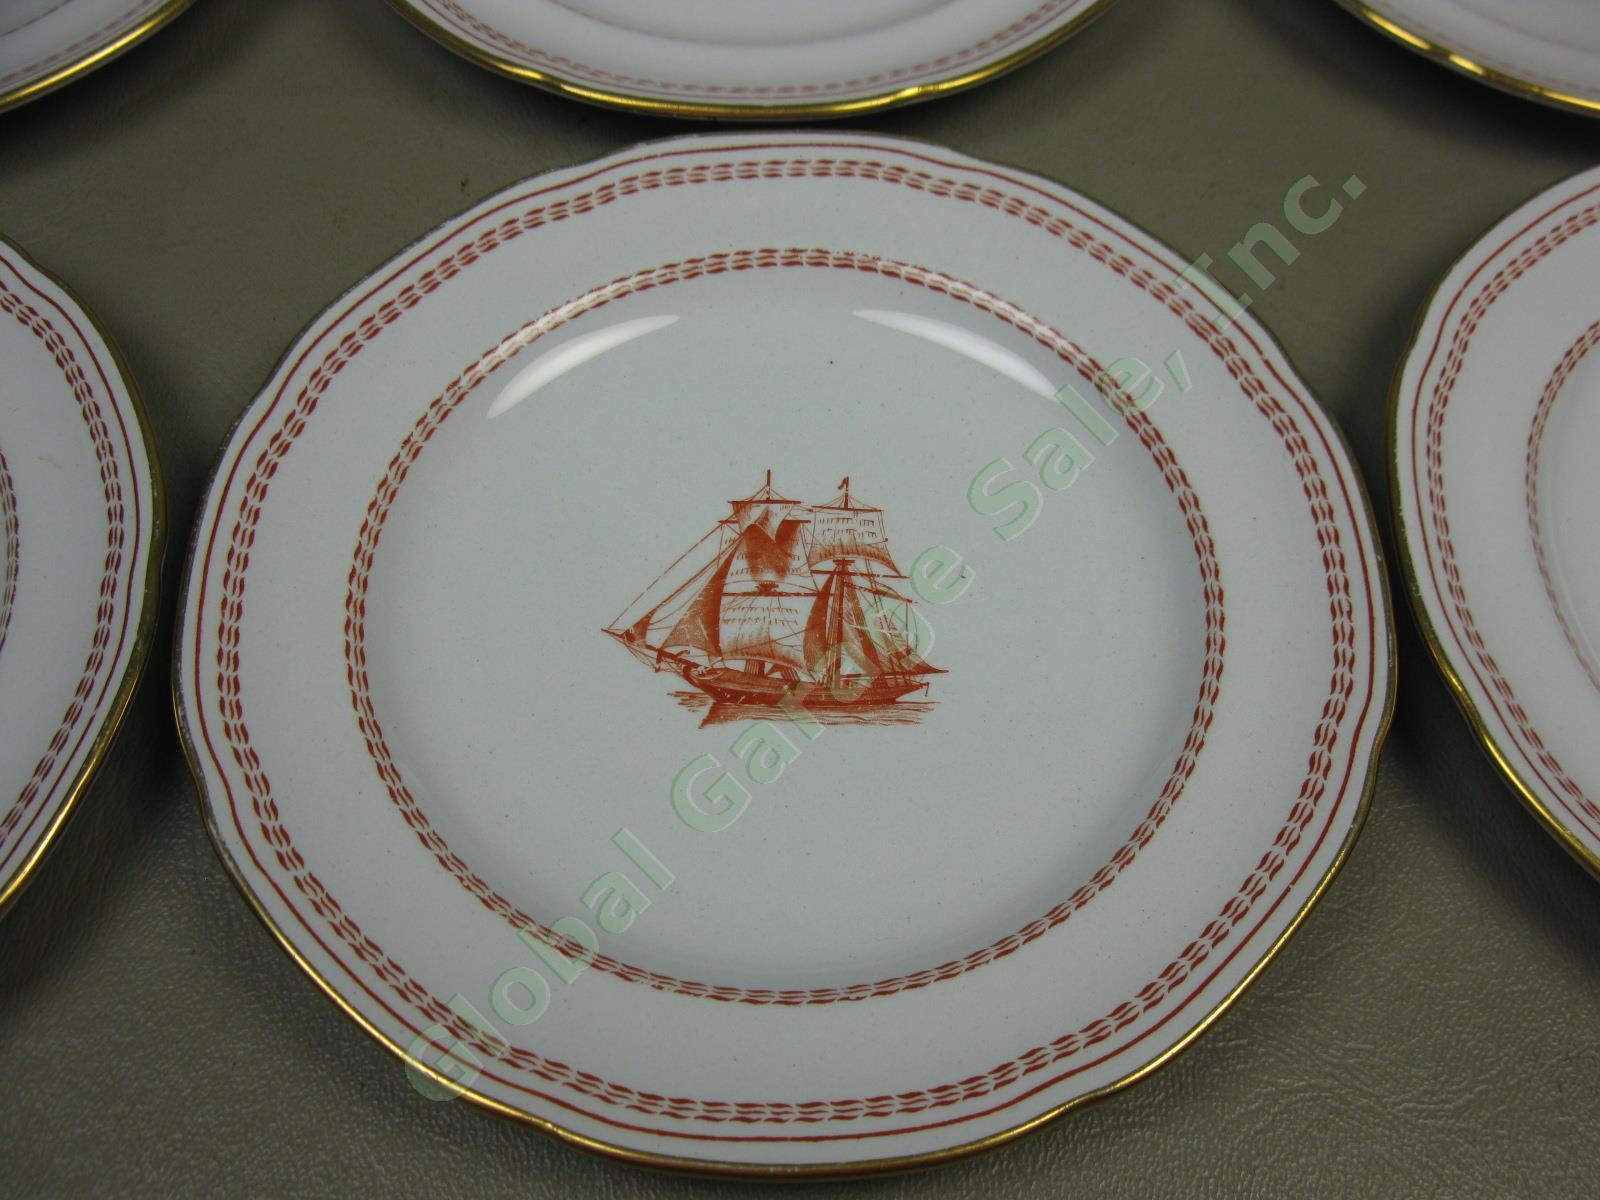 6 Spode Trade Winds Red Pattern Gold Trim Sail Ship W128 6" Bread &Butter Plates 1